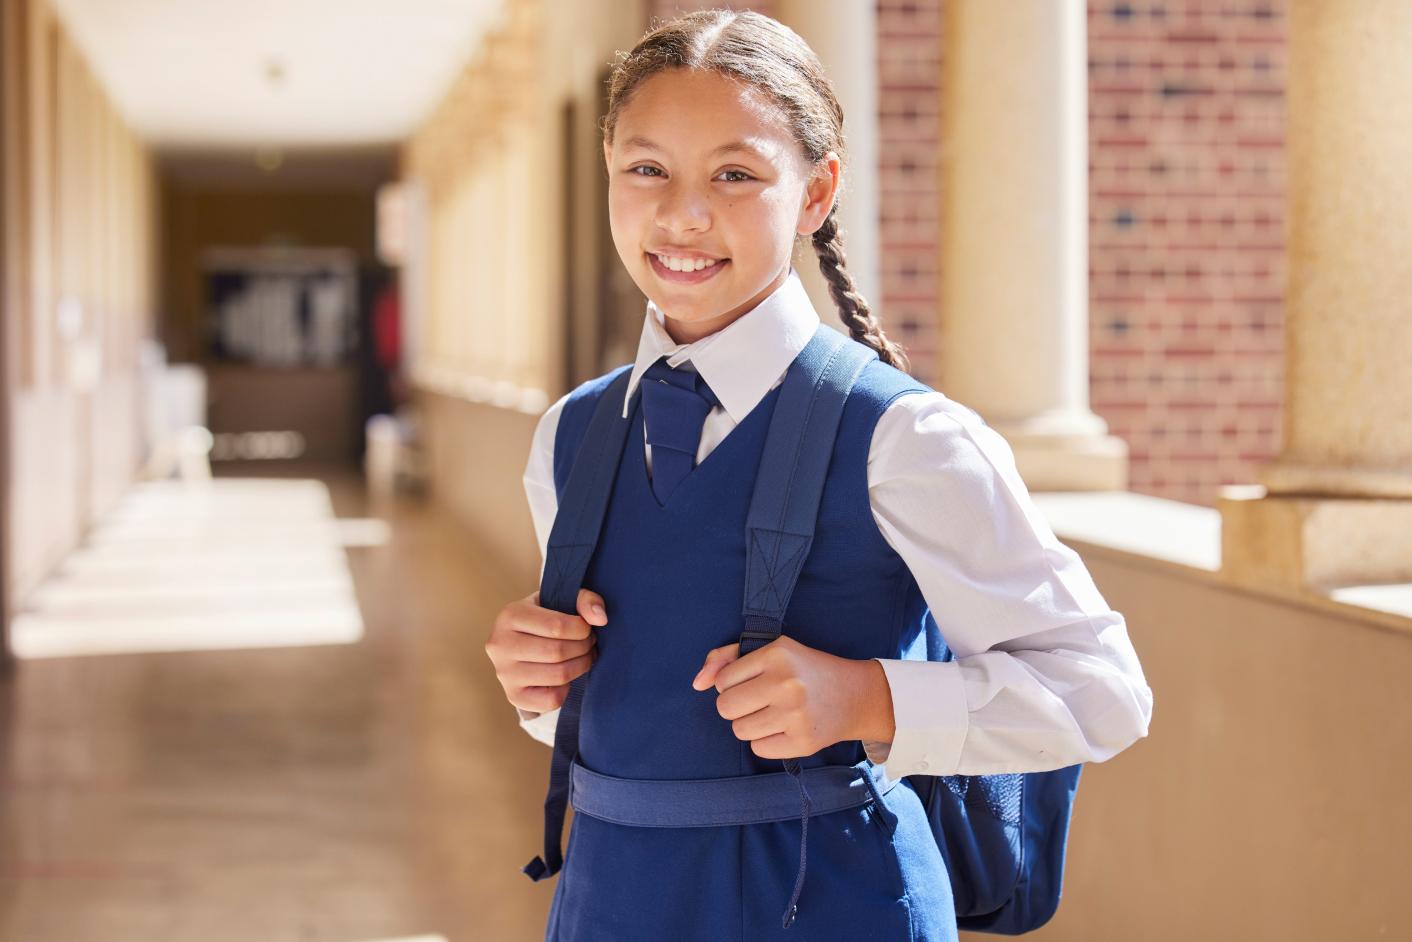 Girl with plaited hair wearing a school uniform and a backpack, smiling and standing in an empty school corridor with columns down one side.